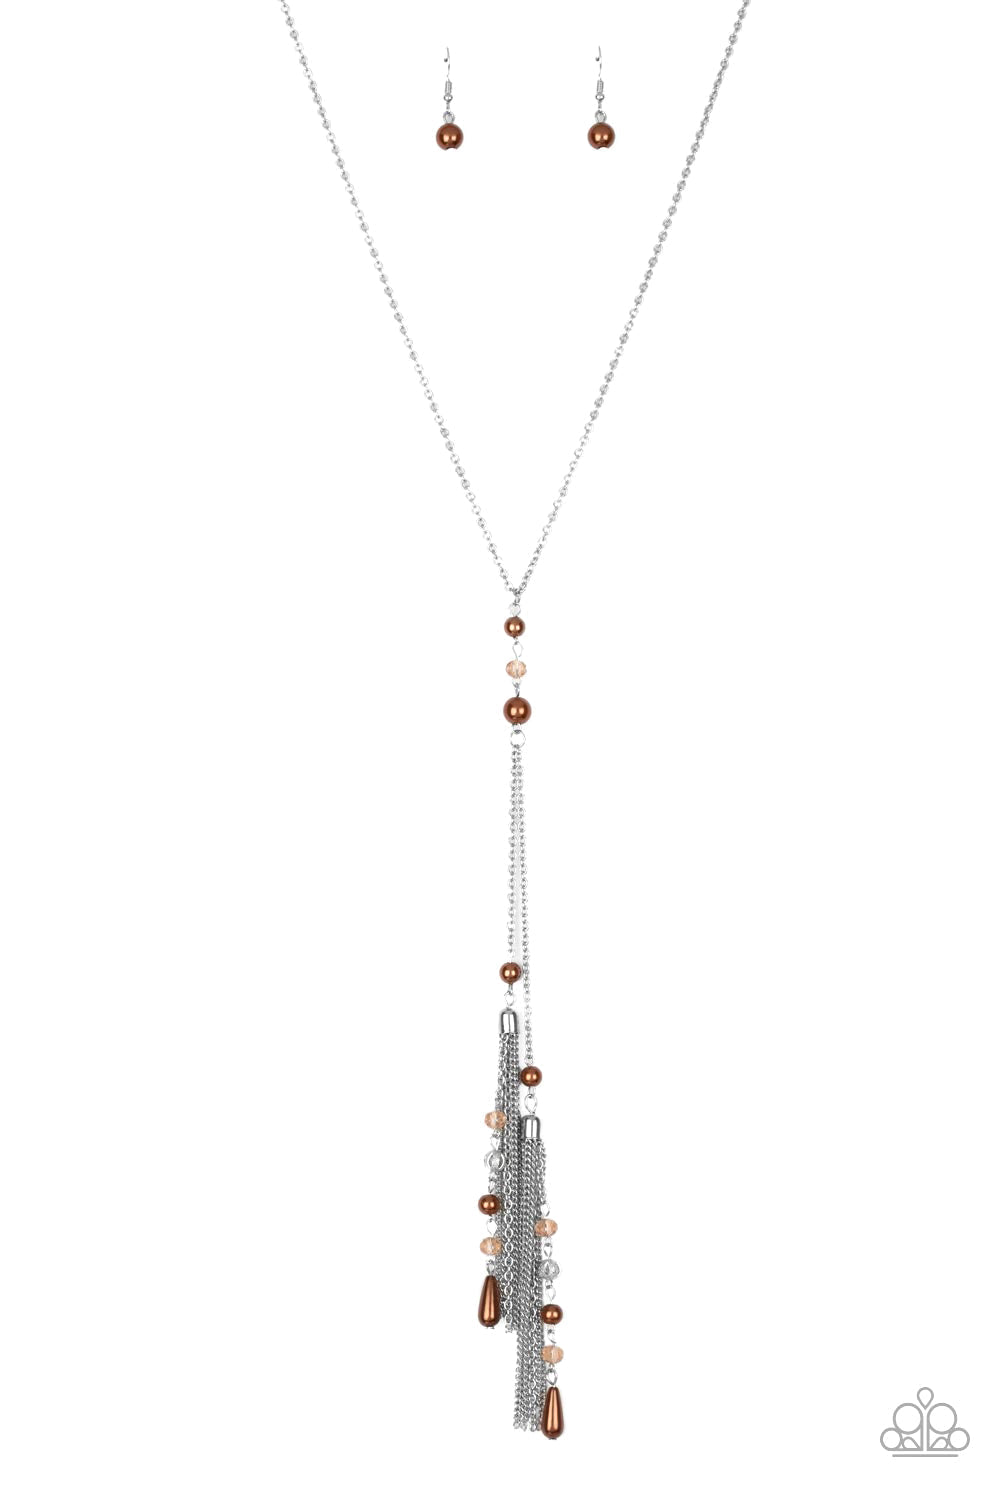 Timeless Tassels - Brown Pearl and Silver Necklace - Paparazzi Accessories - Dainty brown pearls and sparkling brown crystal-like beads give way to two shimmery silver chain tassels. Infused with ornate silver beads, strands of matching beads trickle down the tassels for a refined flair. Features an adjustable clasp closure.